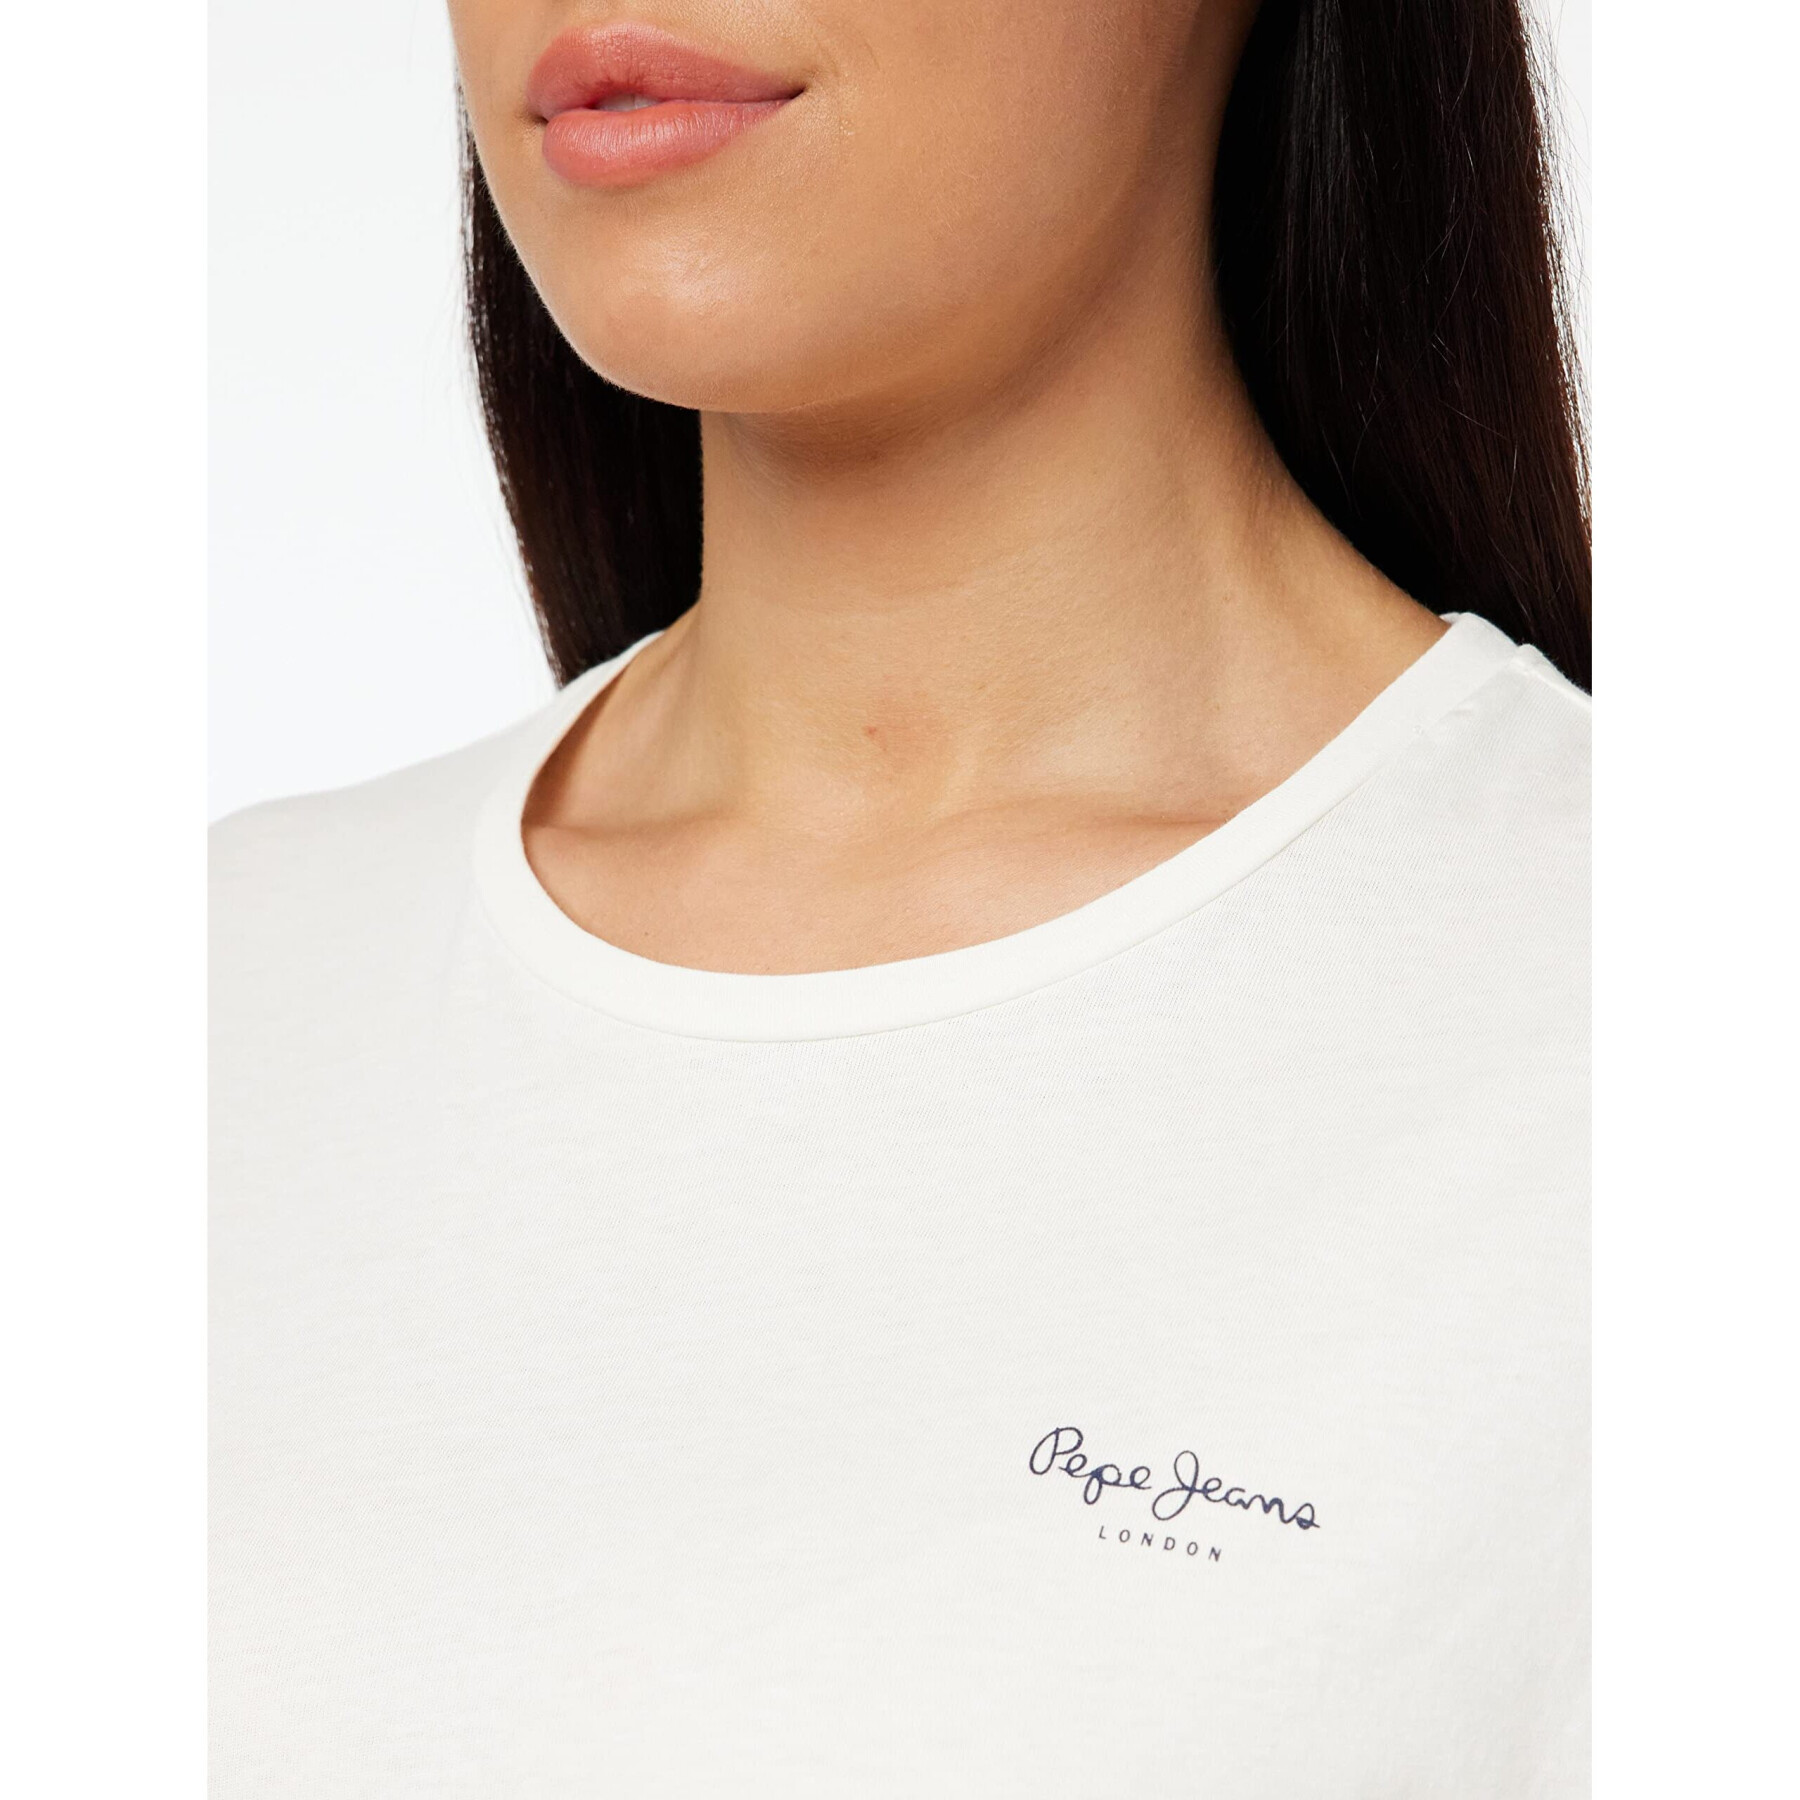 Dames-T-shirt Pepe Jeans Bloom